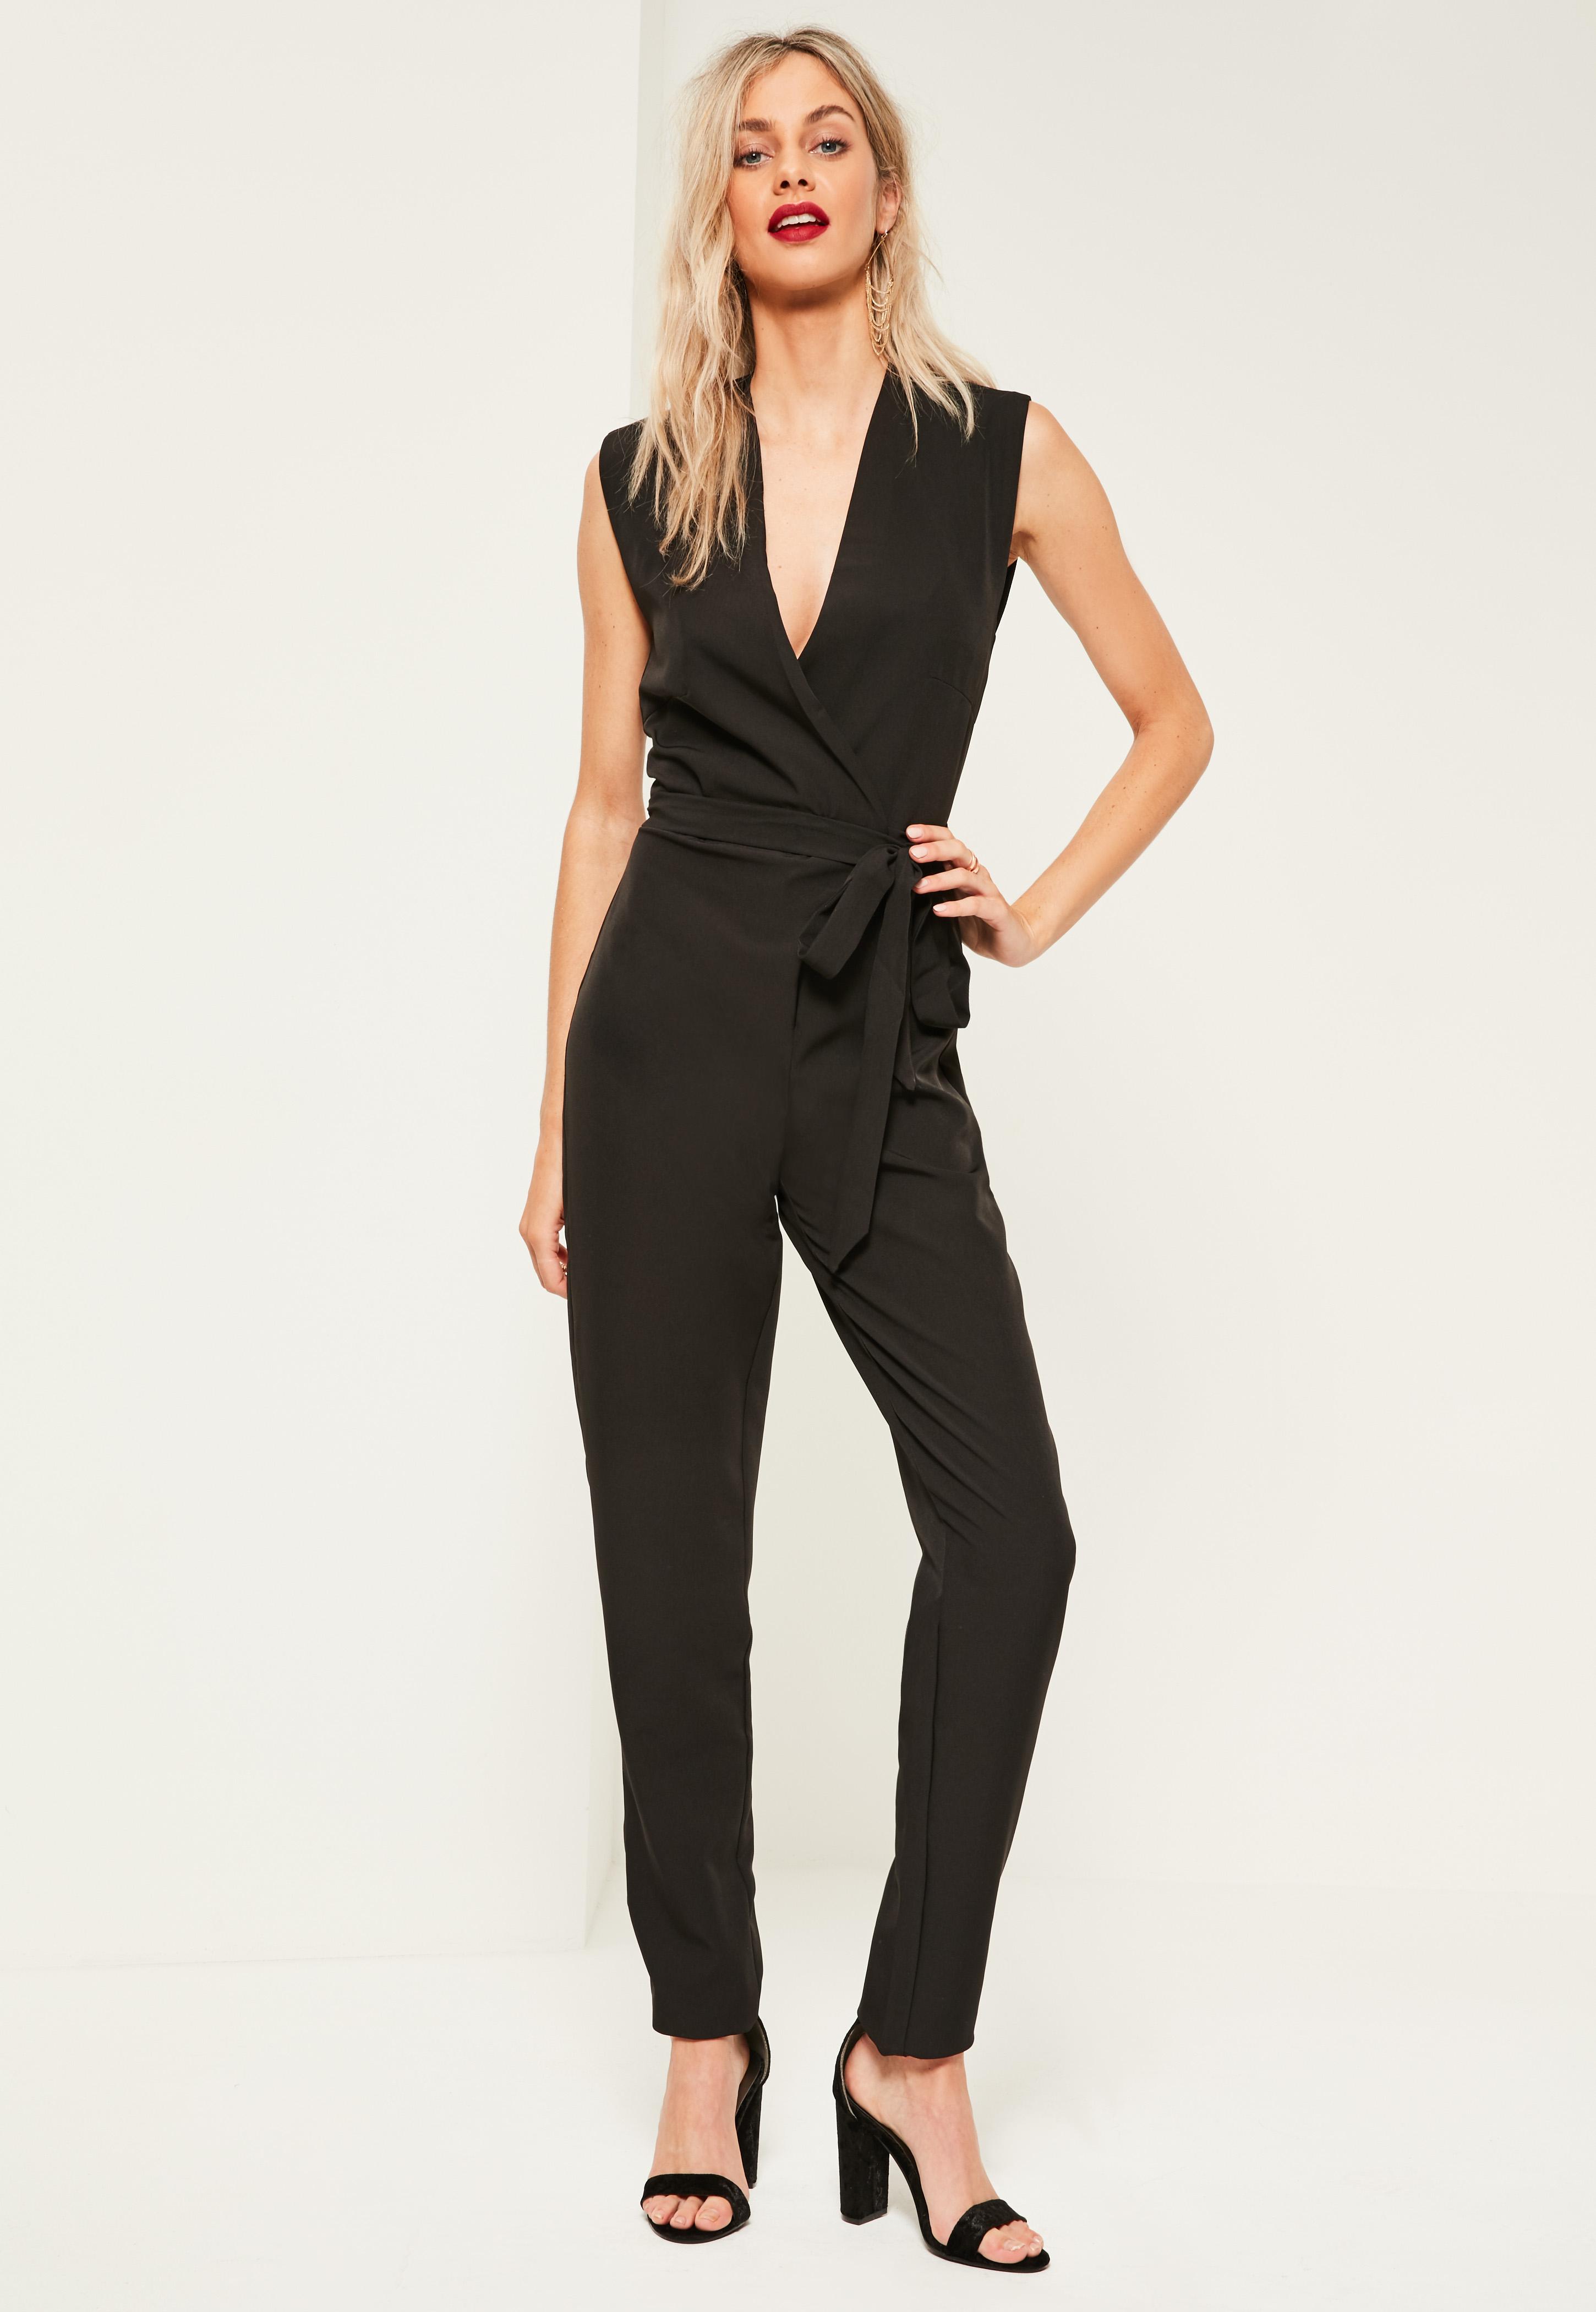 Missguided Tall Exclusive Black Sleeveless Tuxedo Jumpsuit in Black | Lyst